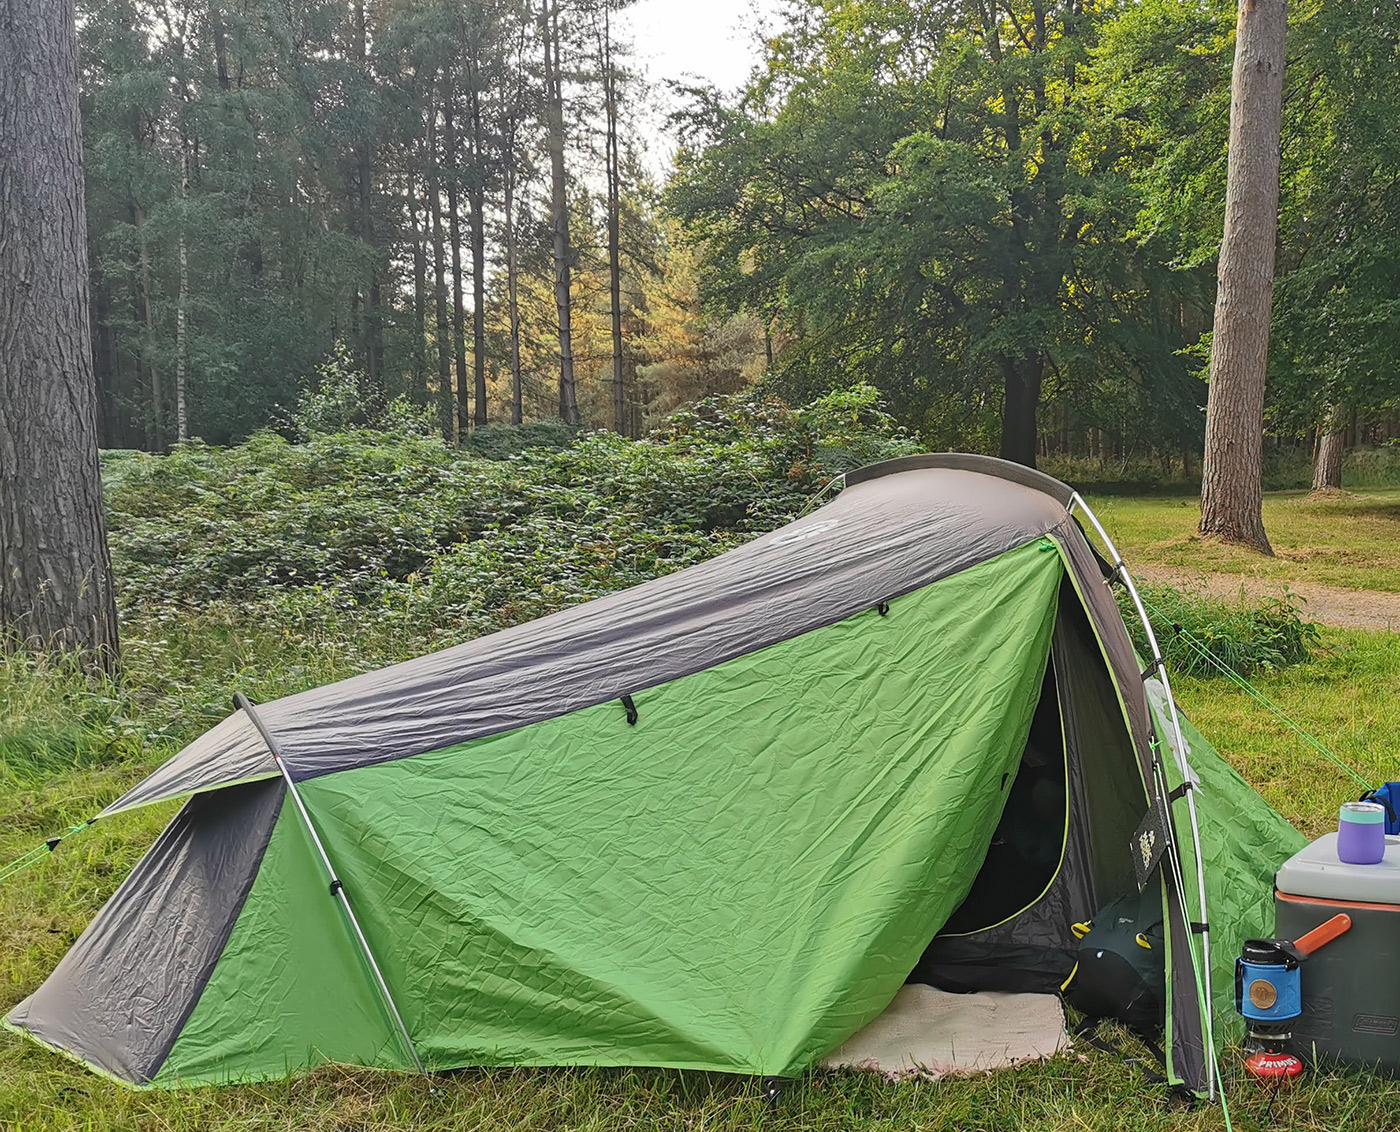 With The Coleman Batur Tent - Review